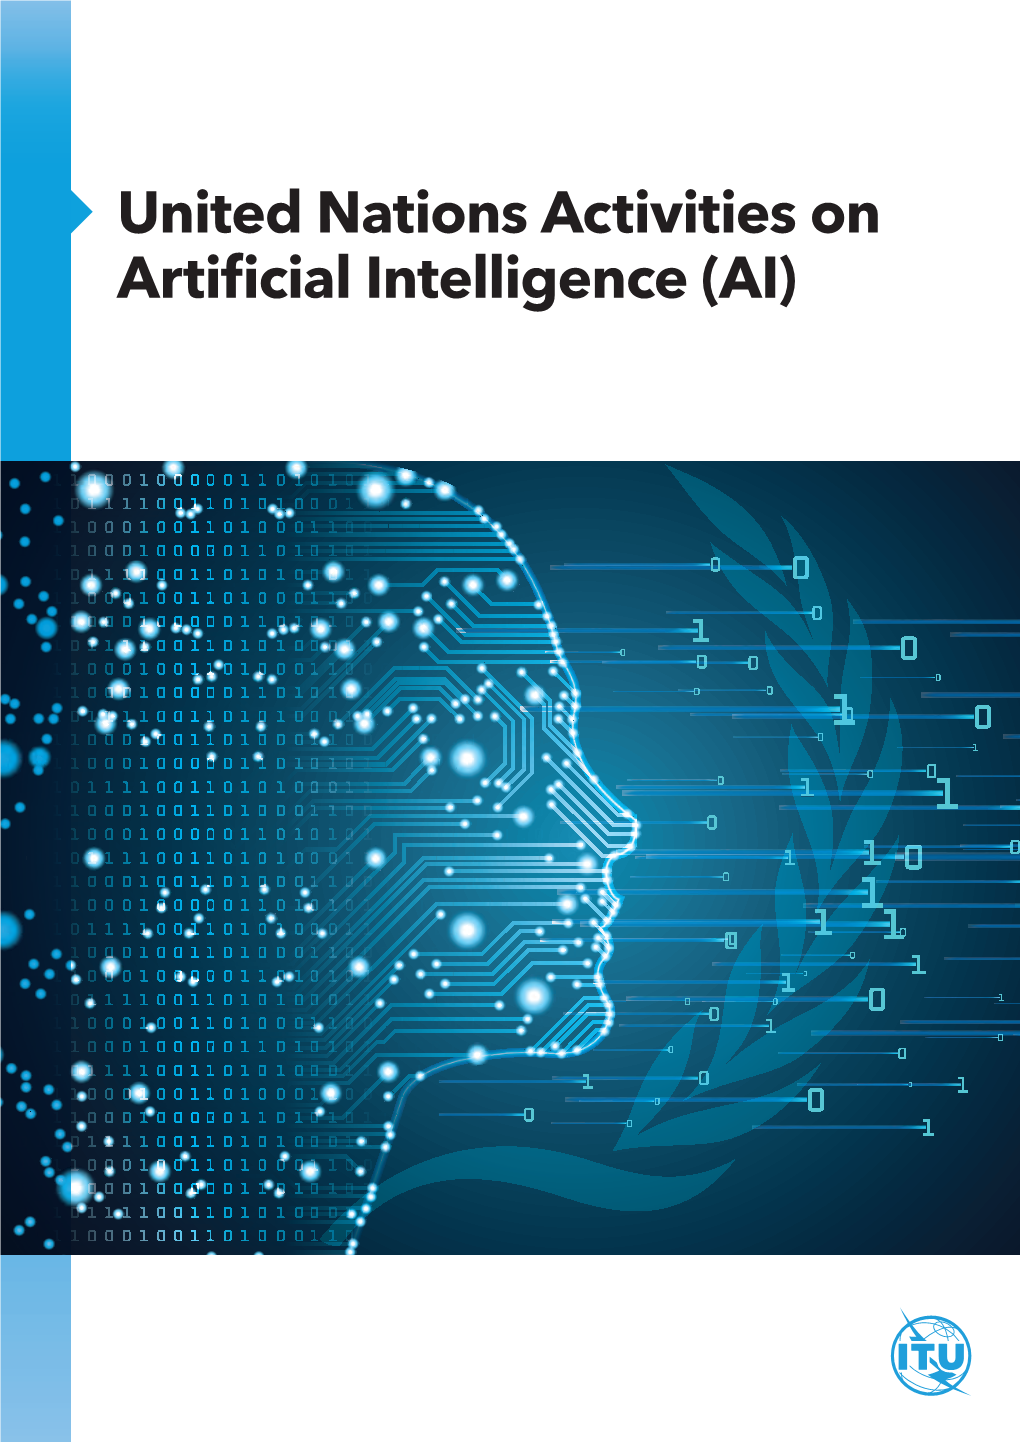 United Nations Activities on Artificial Intelligence (AI) 2018